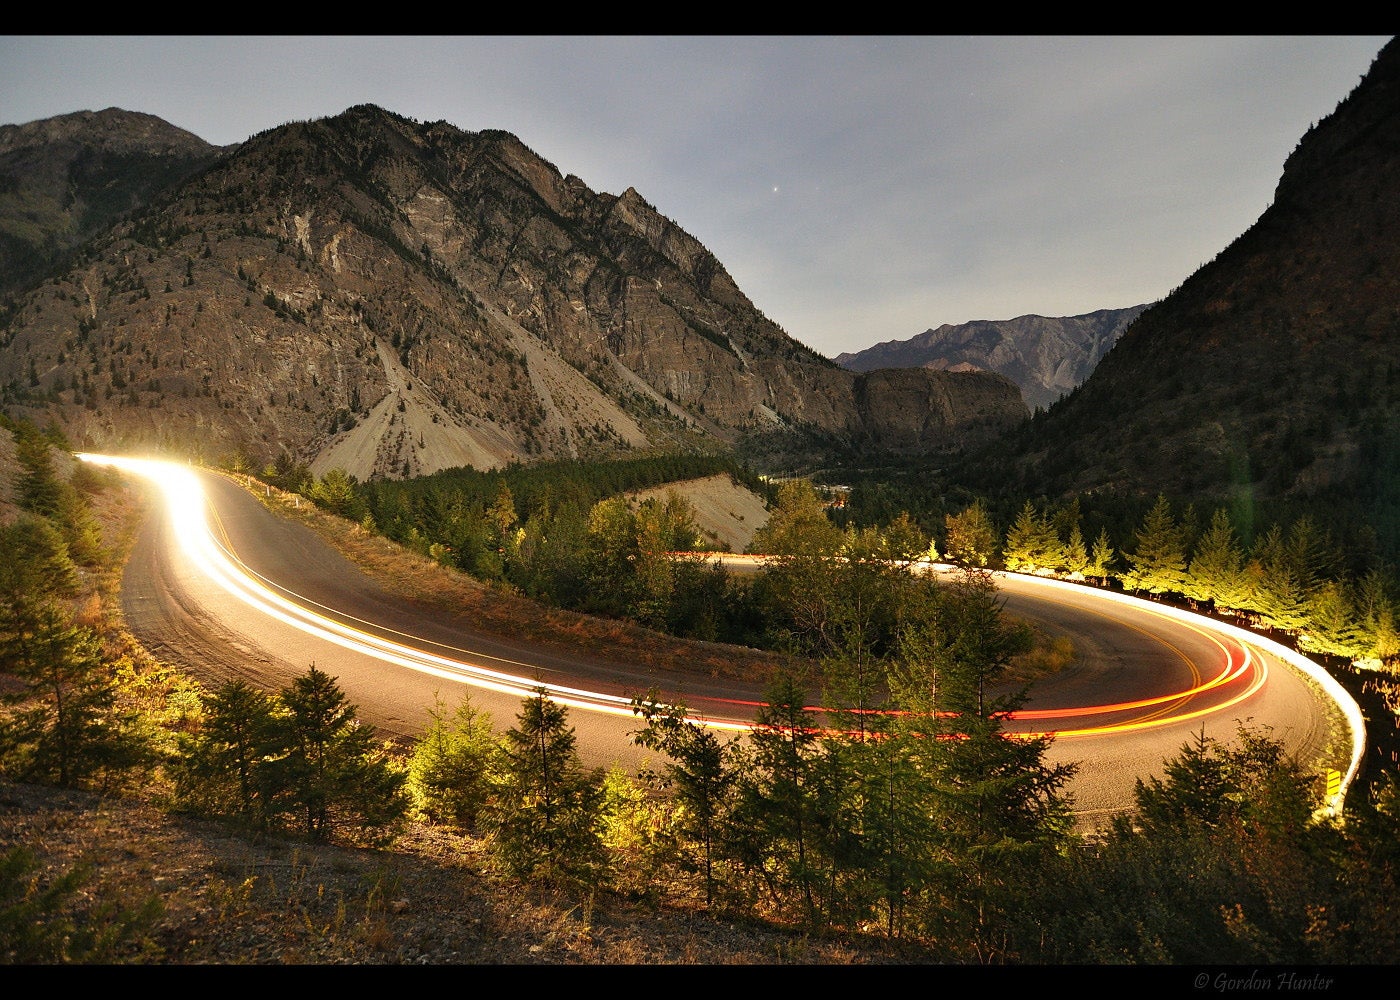 A long exposure shows a car going around a hairpin turn